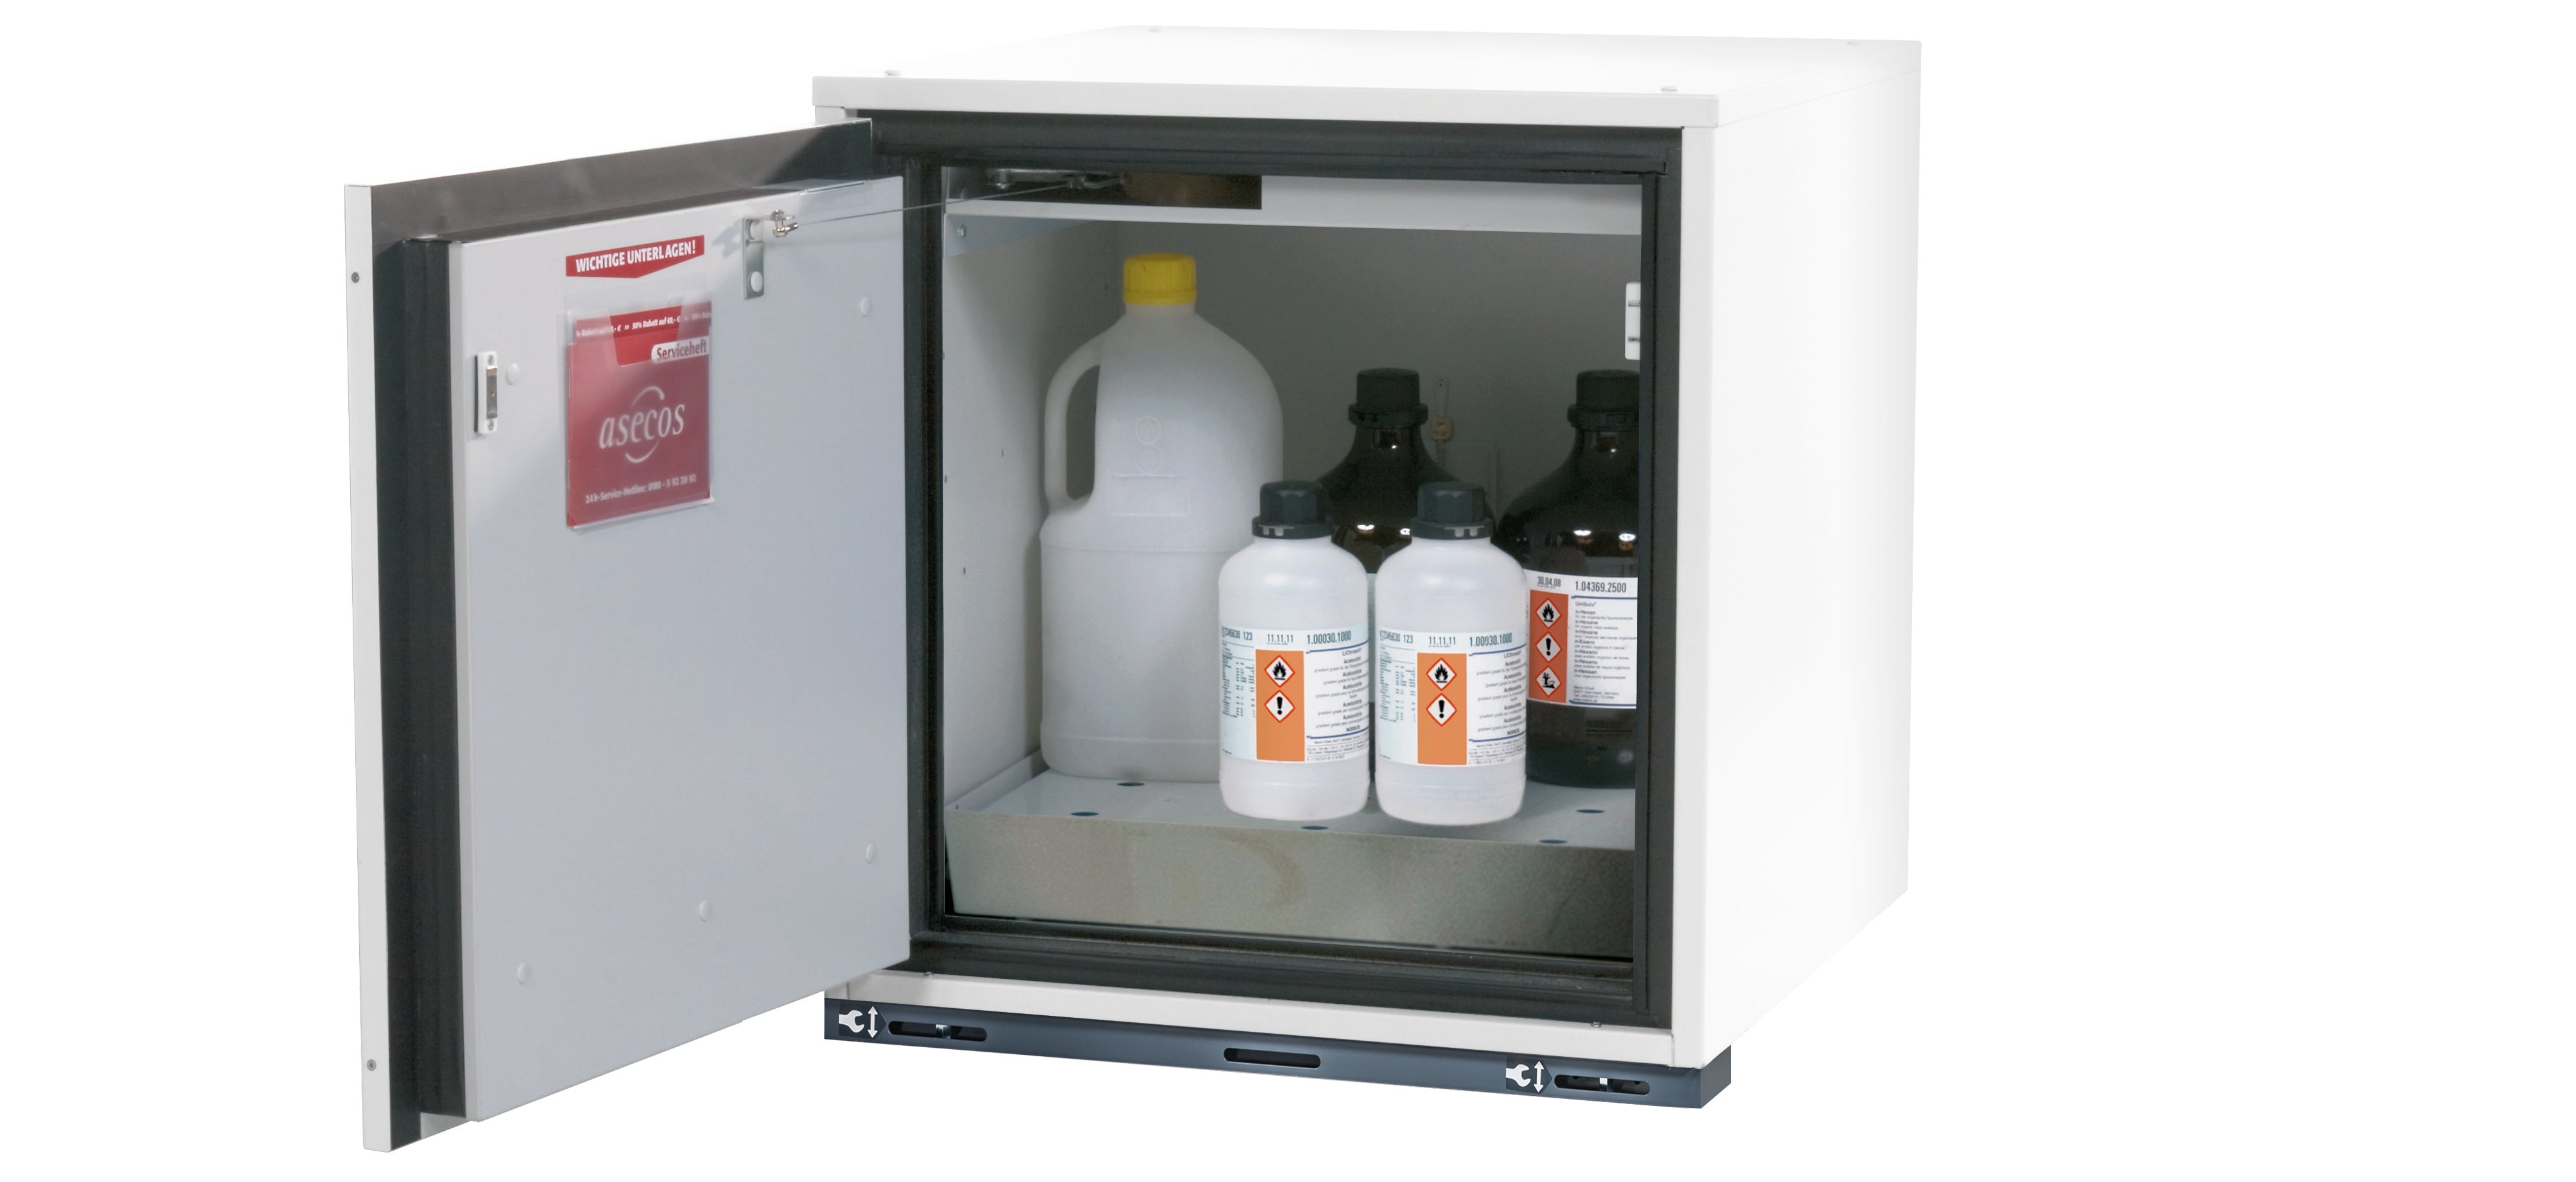 Type 90 safety base cabinet UB-T-90 model UB90.060.059.T in laboratory white (similar to RAL 9016) with 1x perforated sheet insert standard (stainless steel 1.4016)